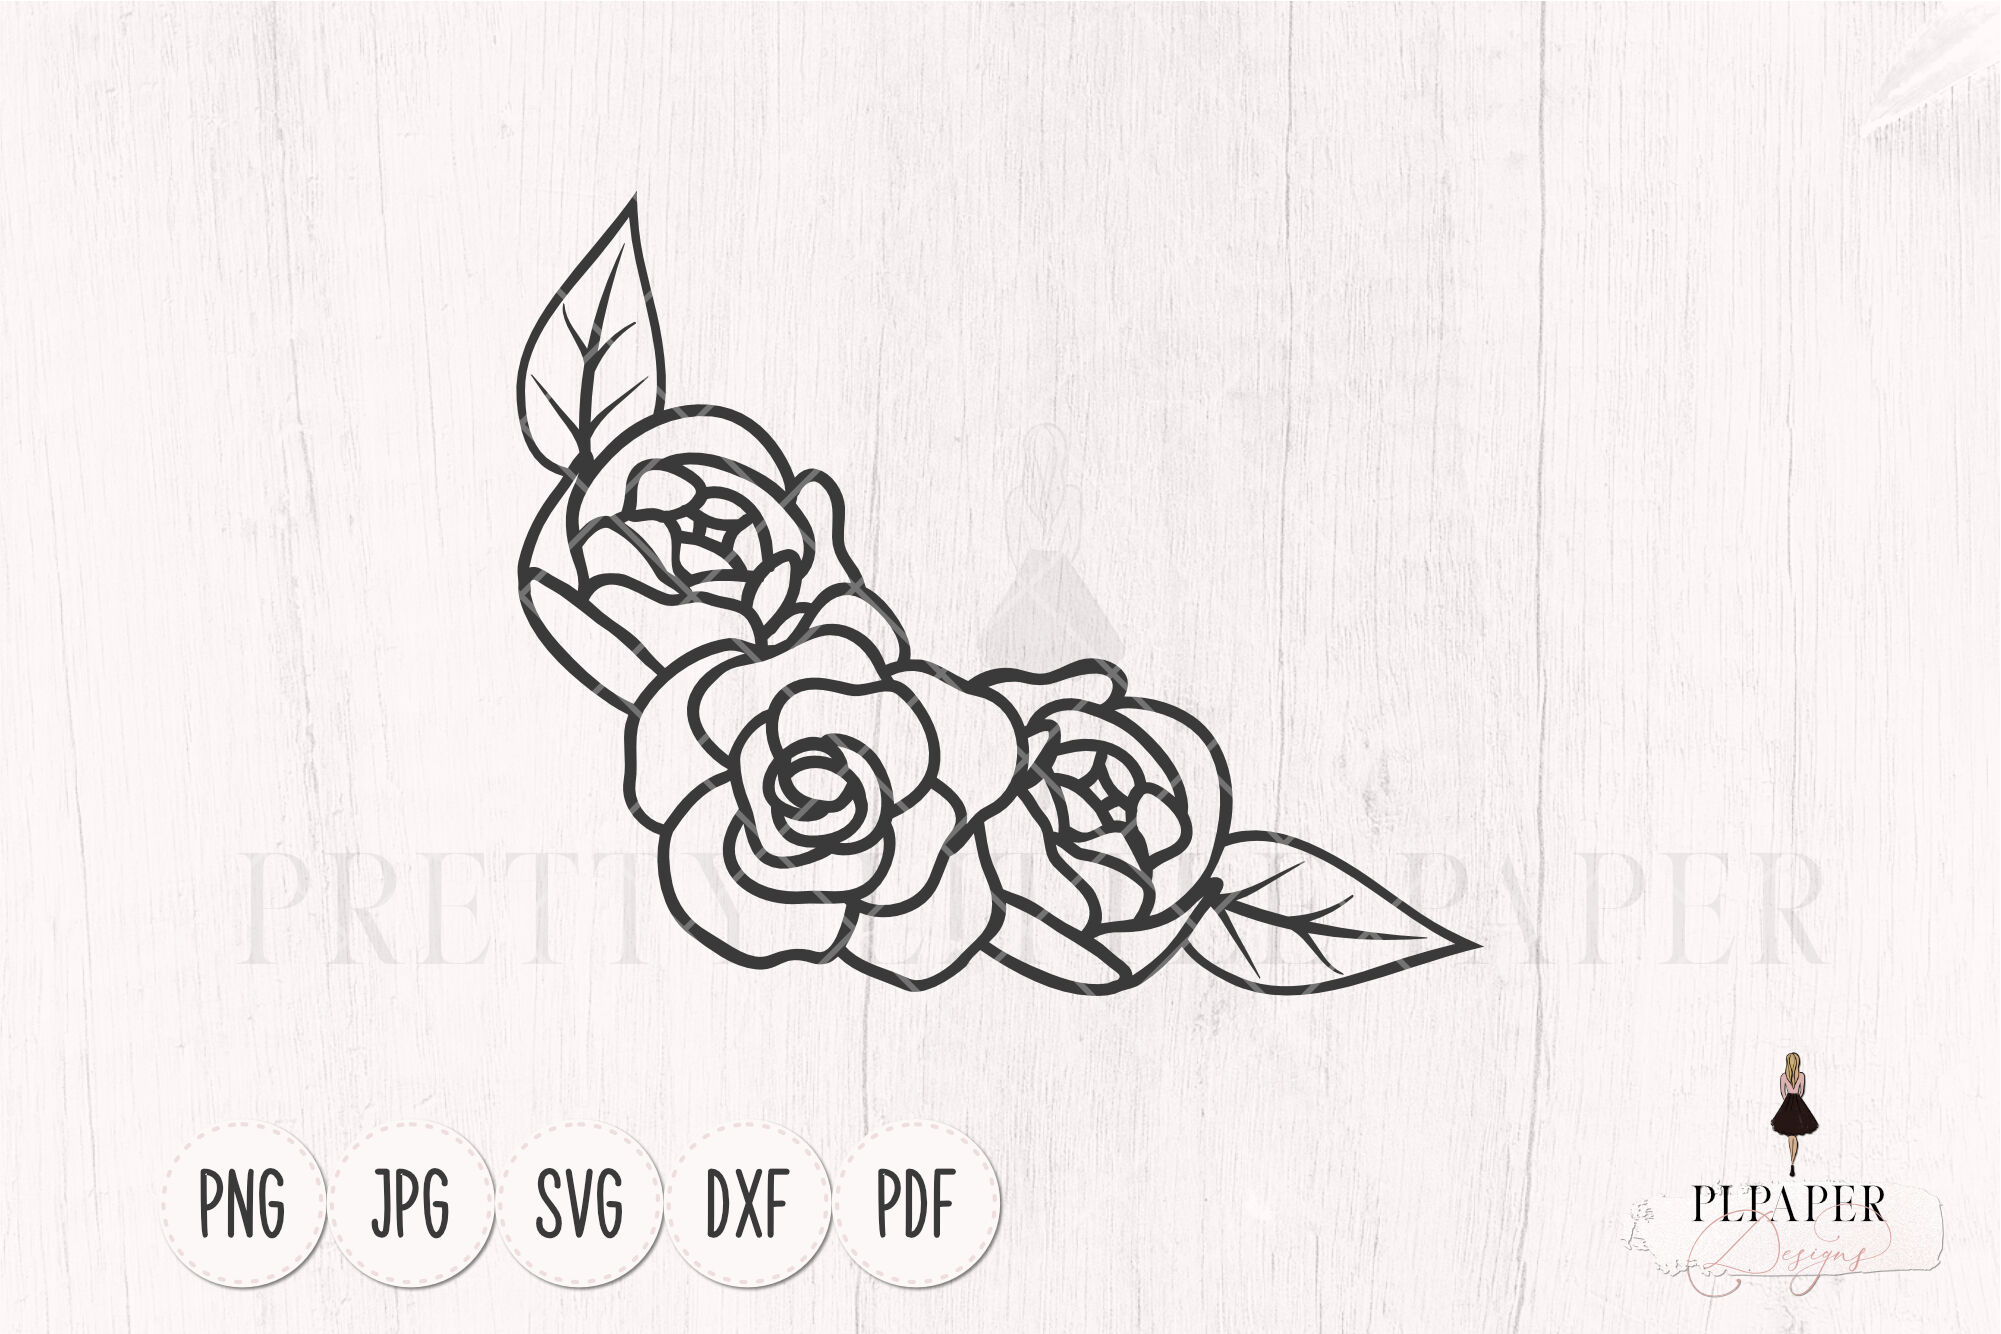 simple flower border designs to draw